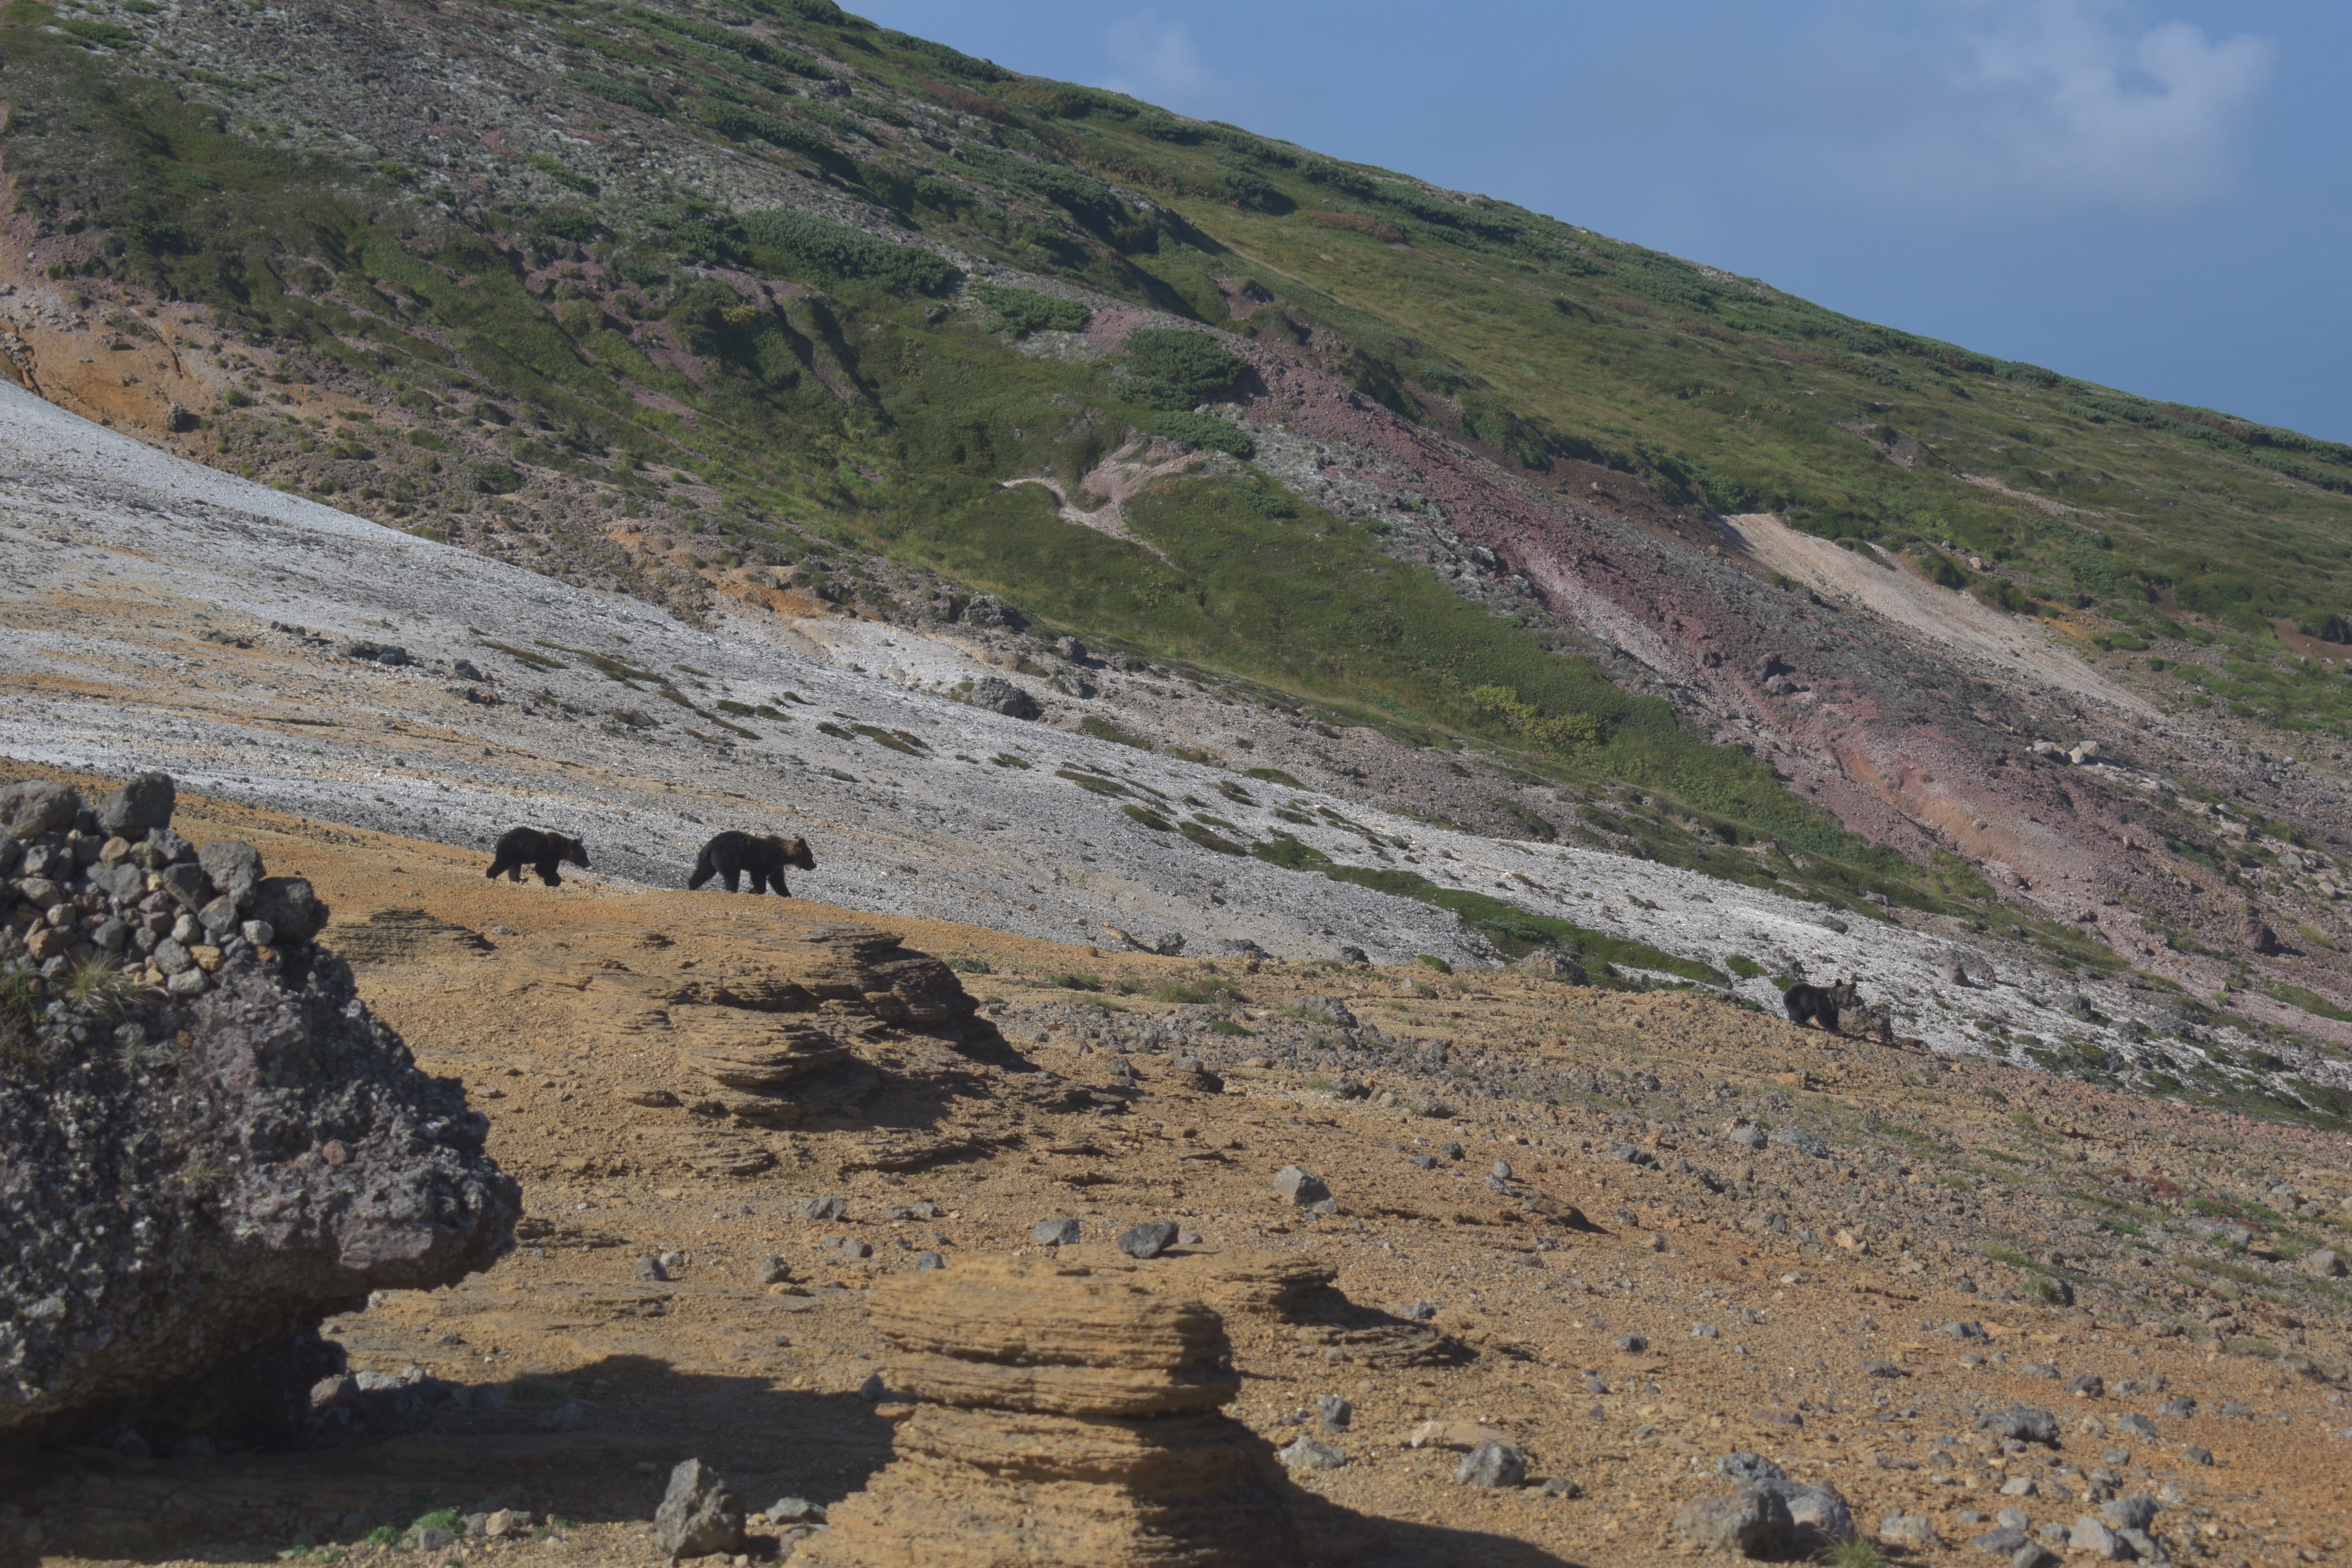 A mother brown bear walks with her cub along a rocky mountainside in the Daisetsuzan national park